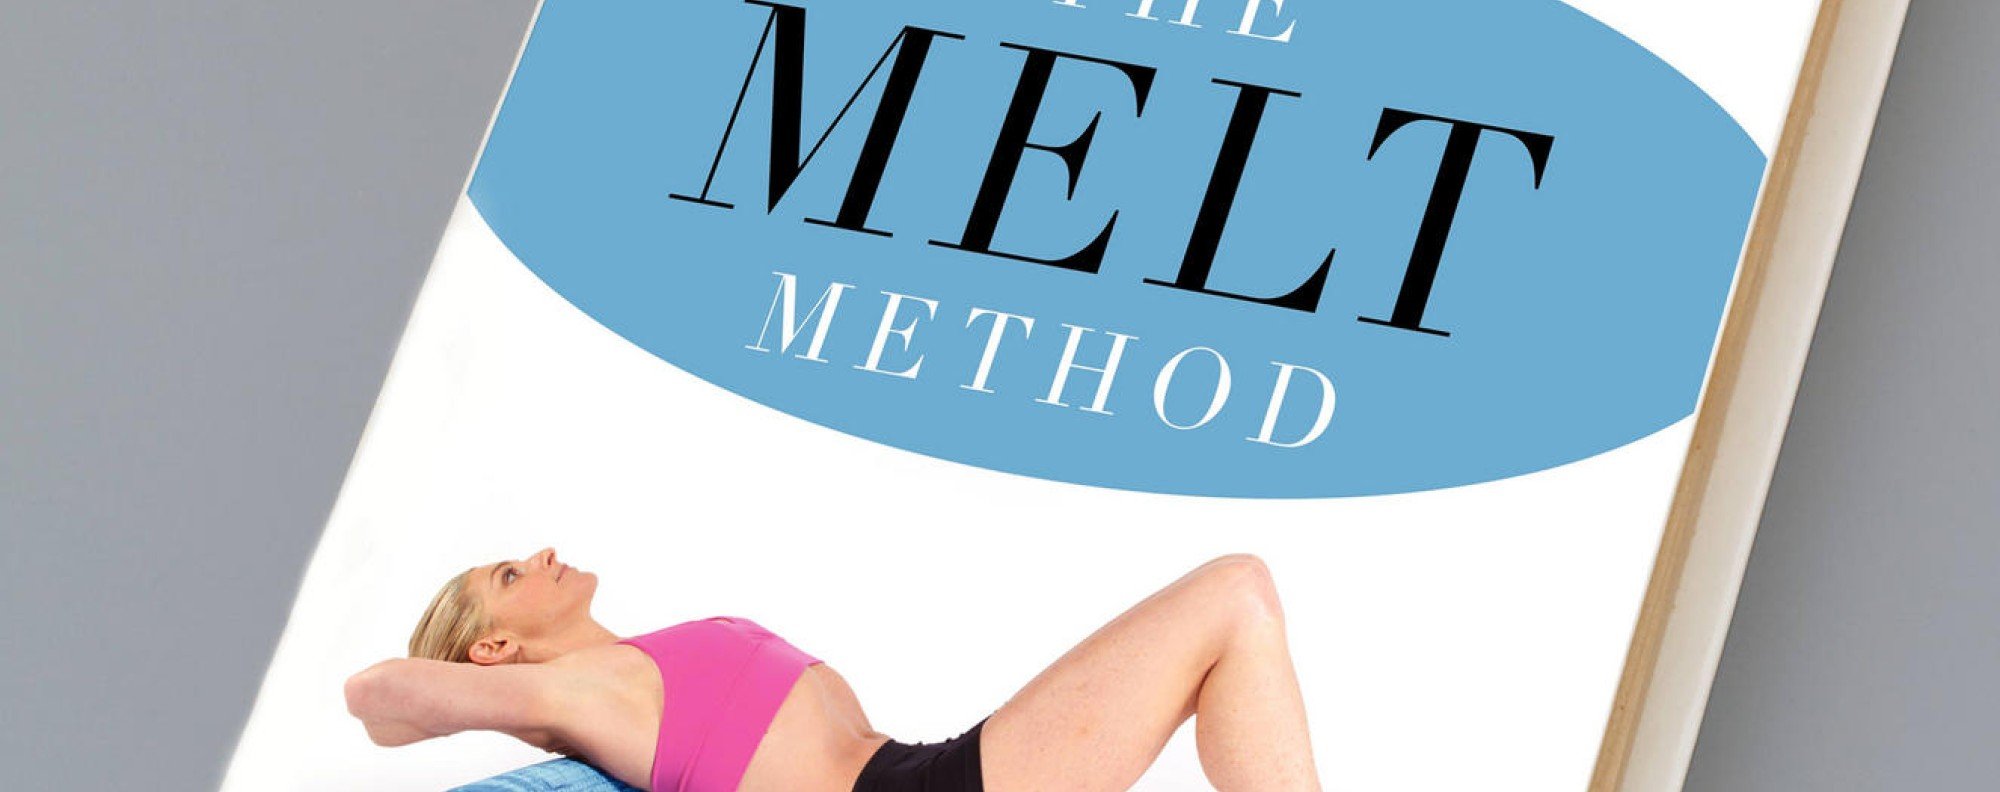 The MELT Method of coping with chronic pain